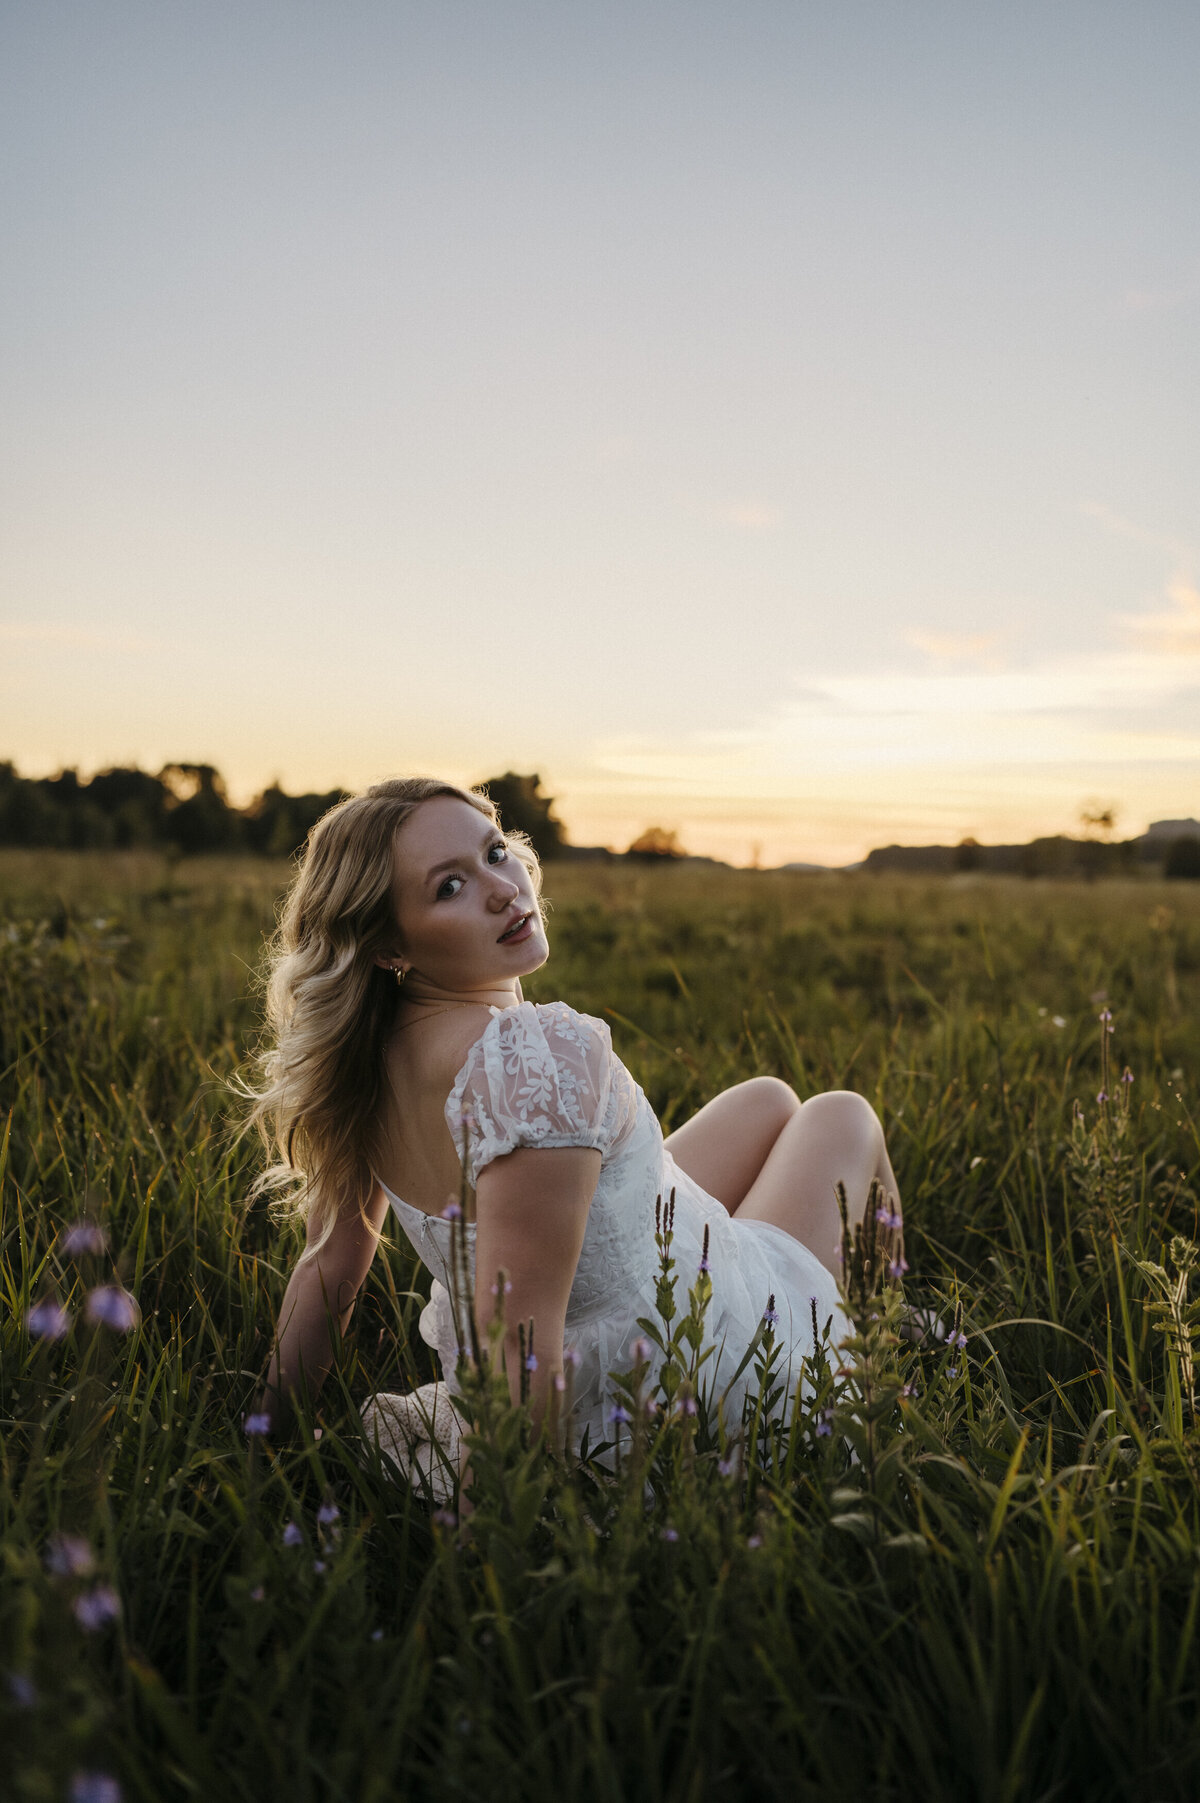 Girl in a field at sunset